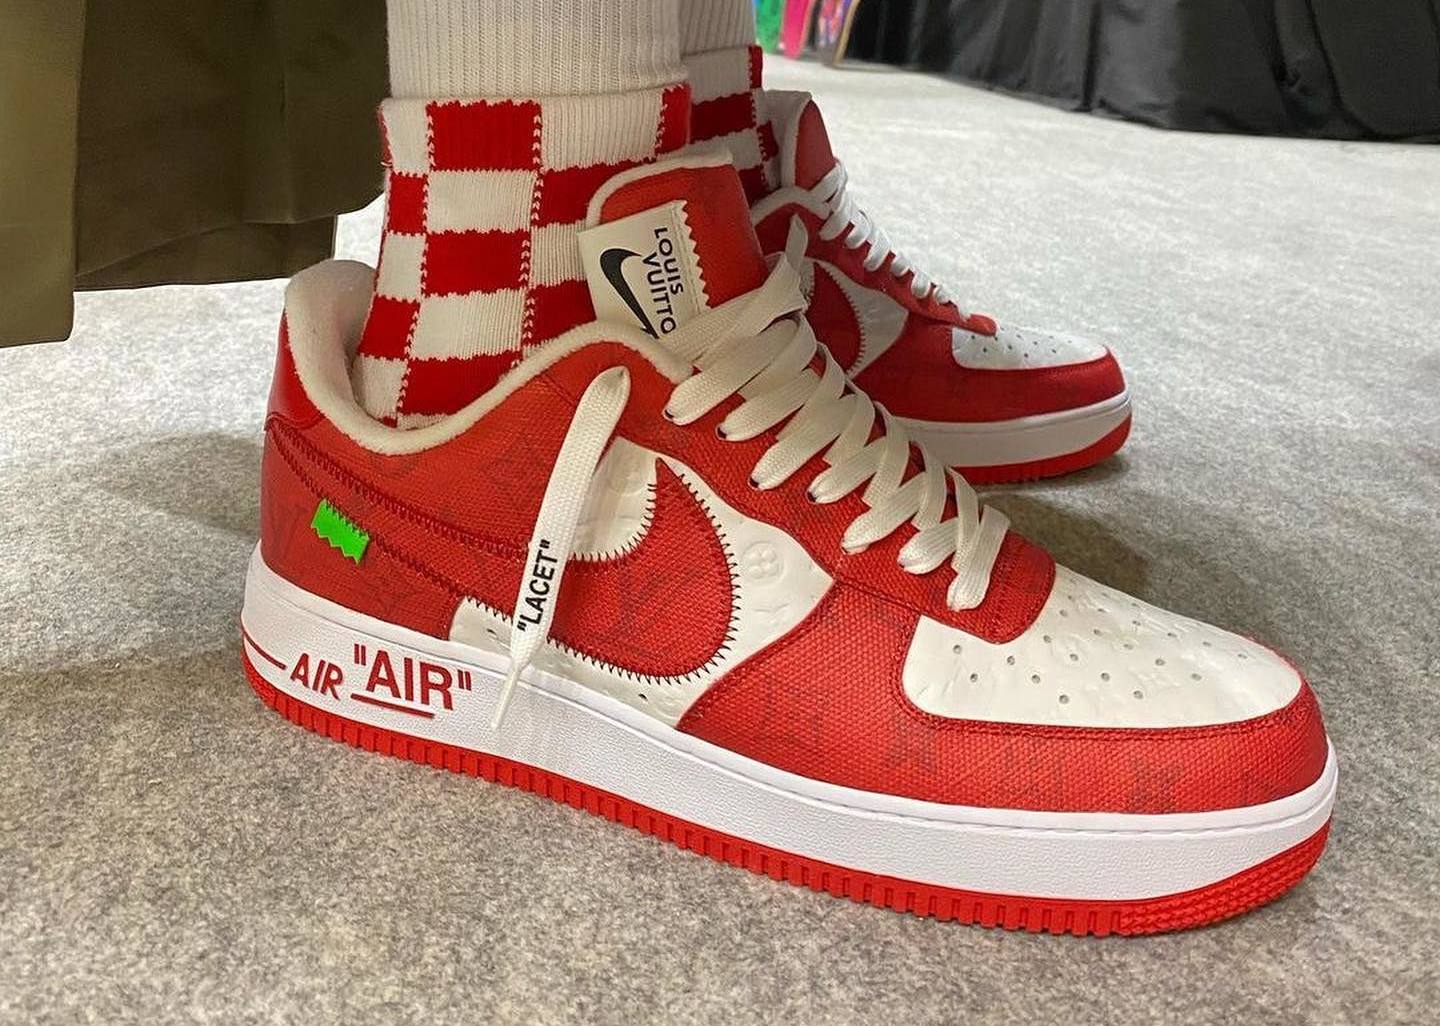 Looks like there are more Louis Vuitton x Nike Air Force 1s on the way